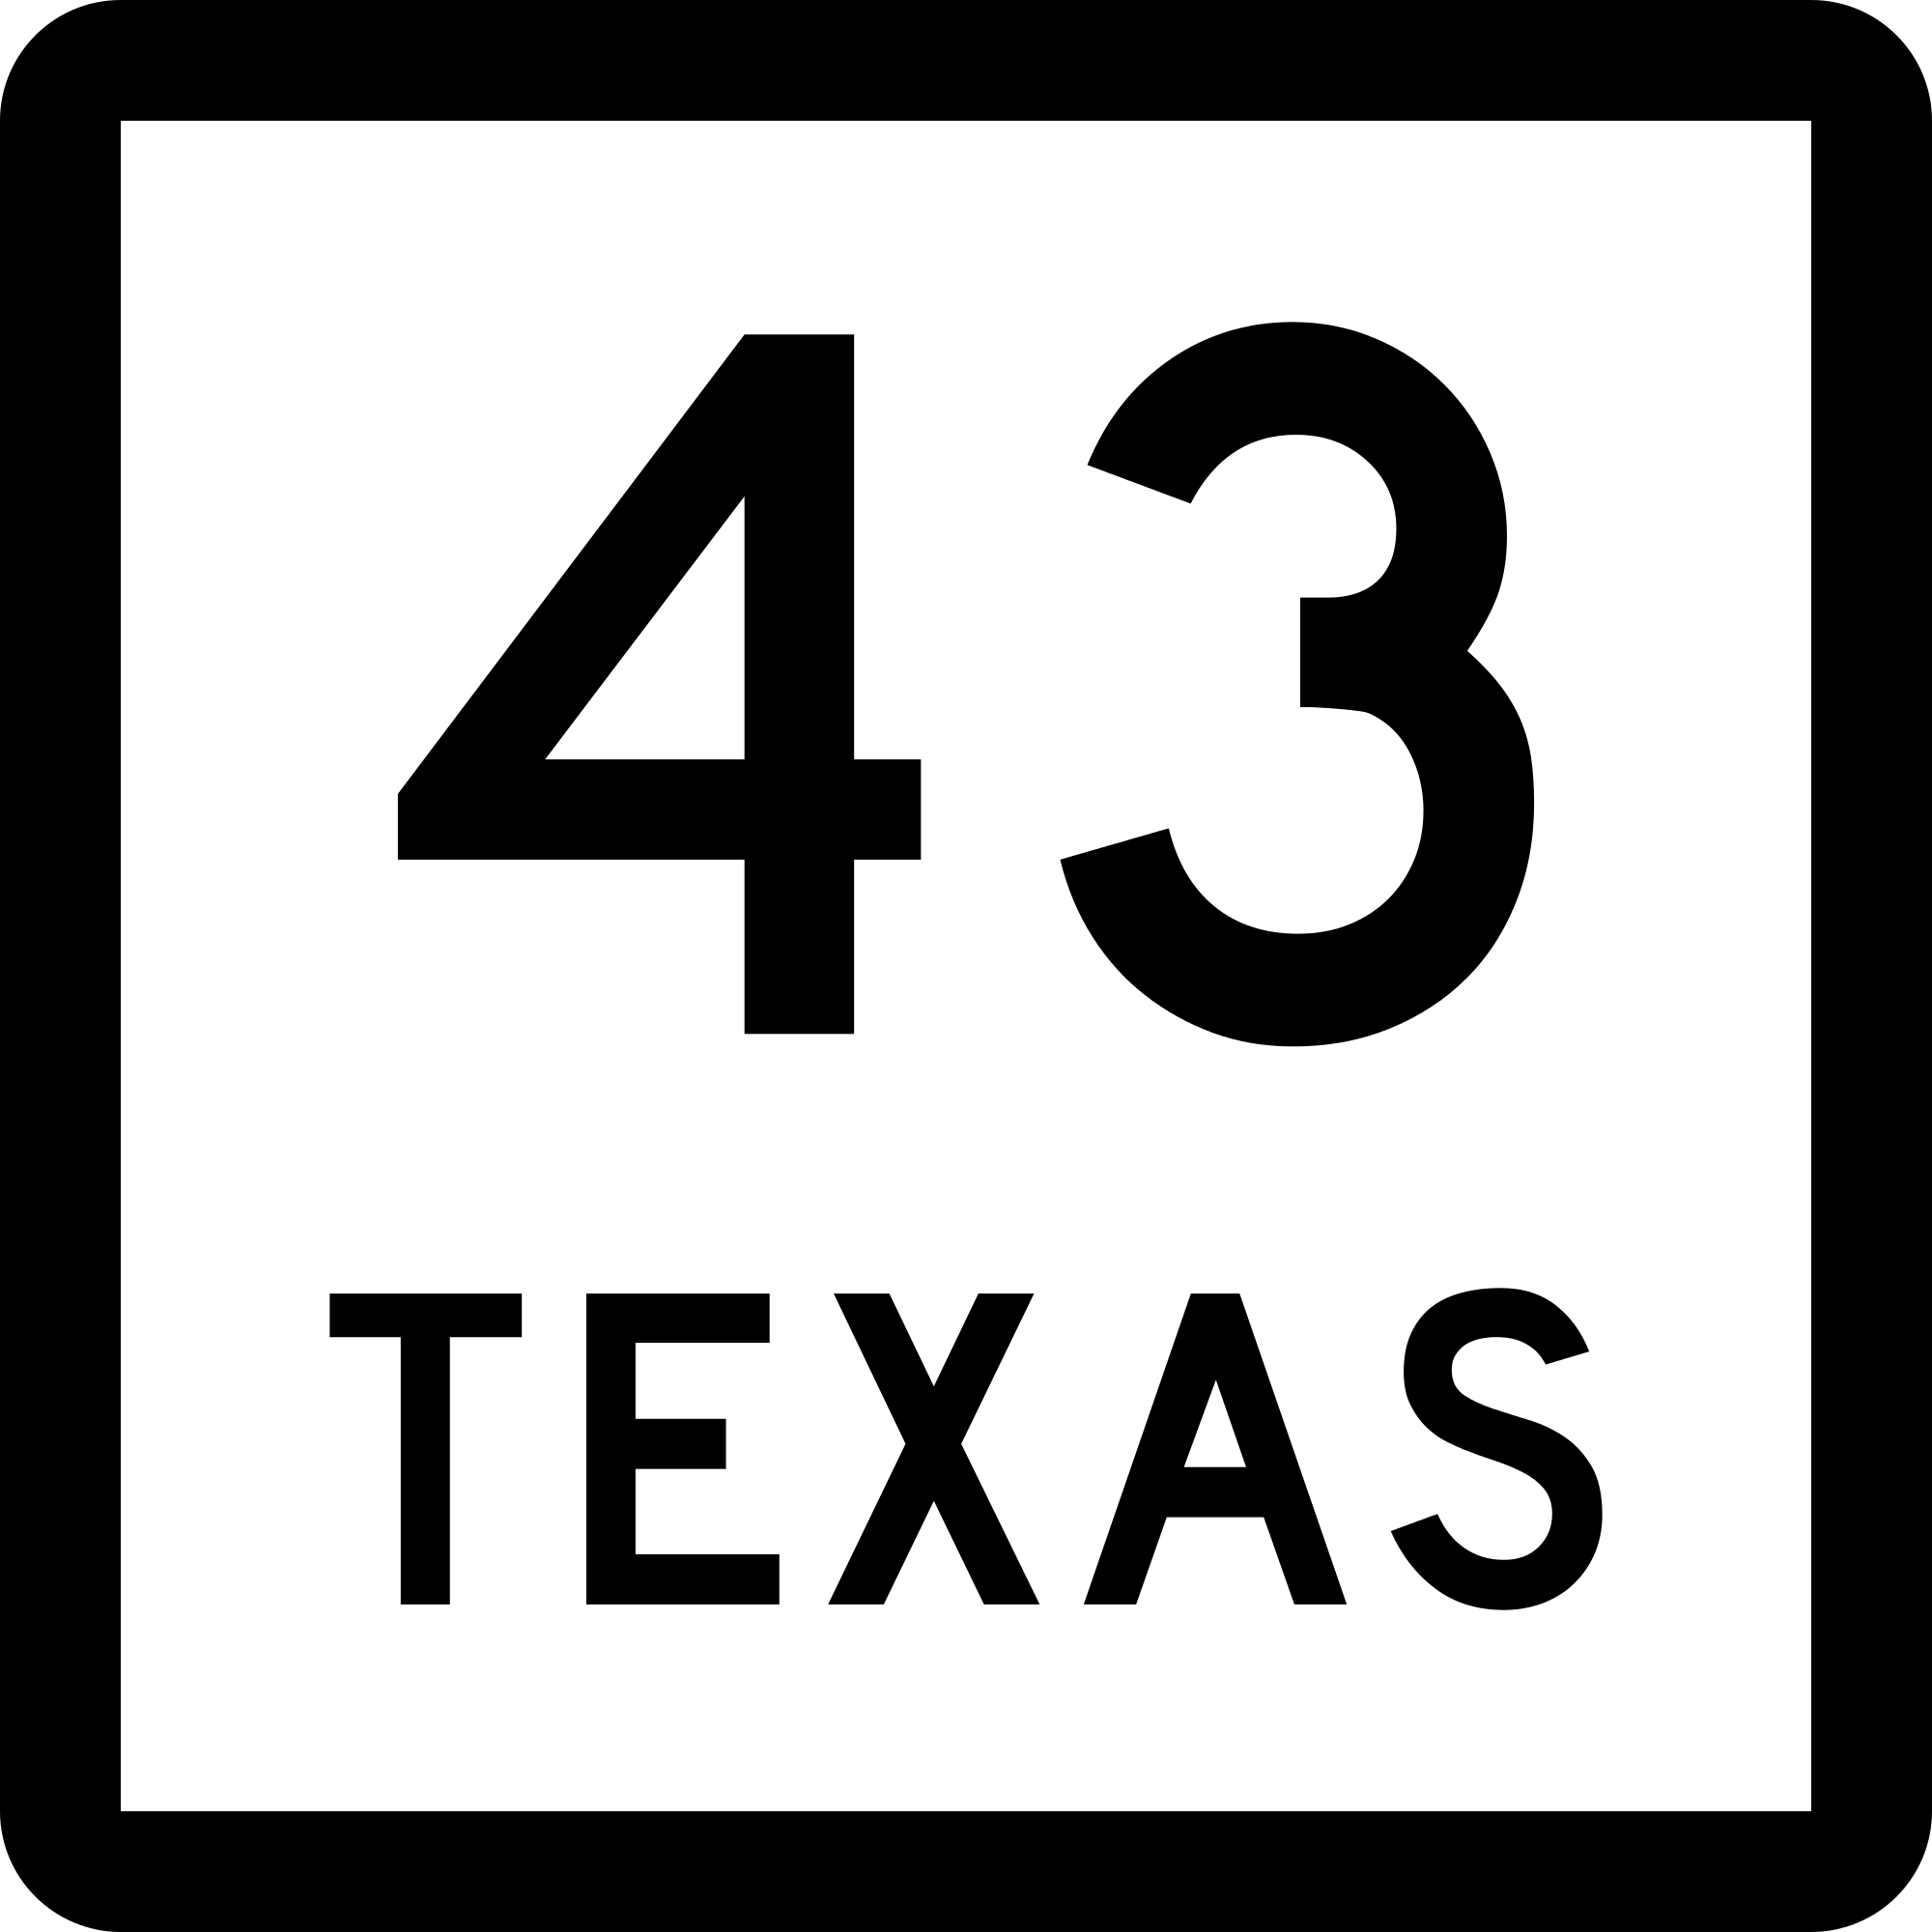 File:Texas 43.svg - Wikimedia Commons